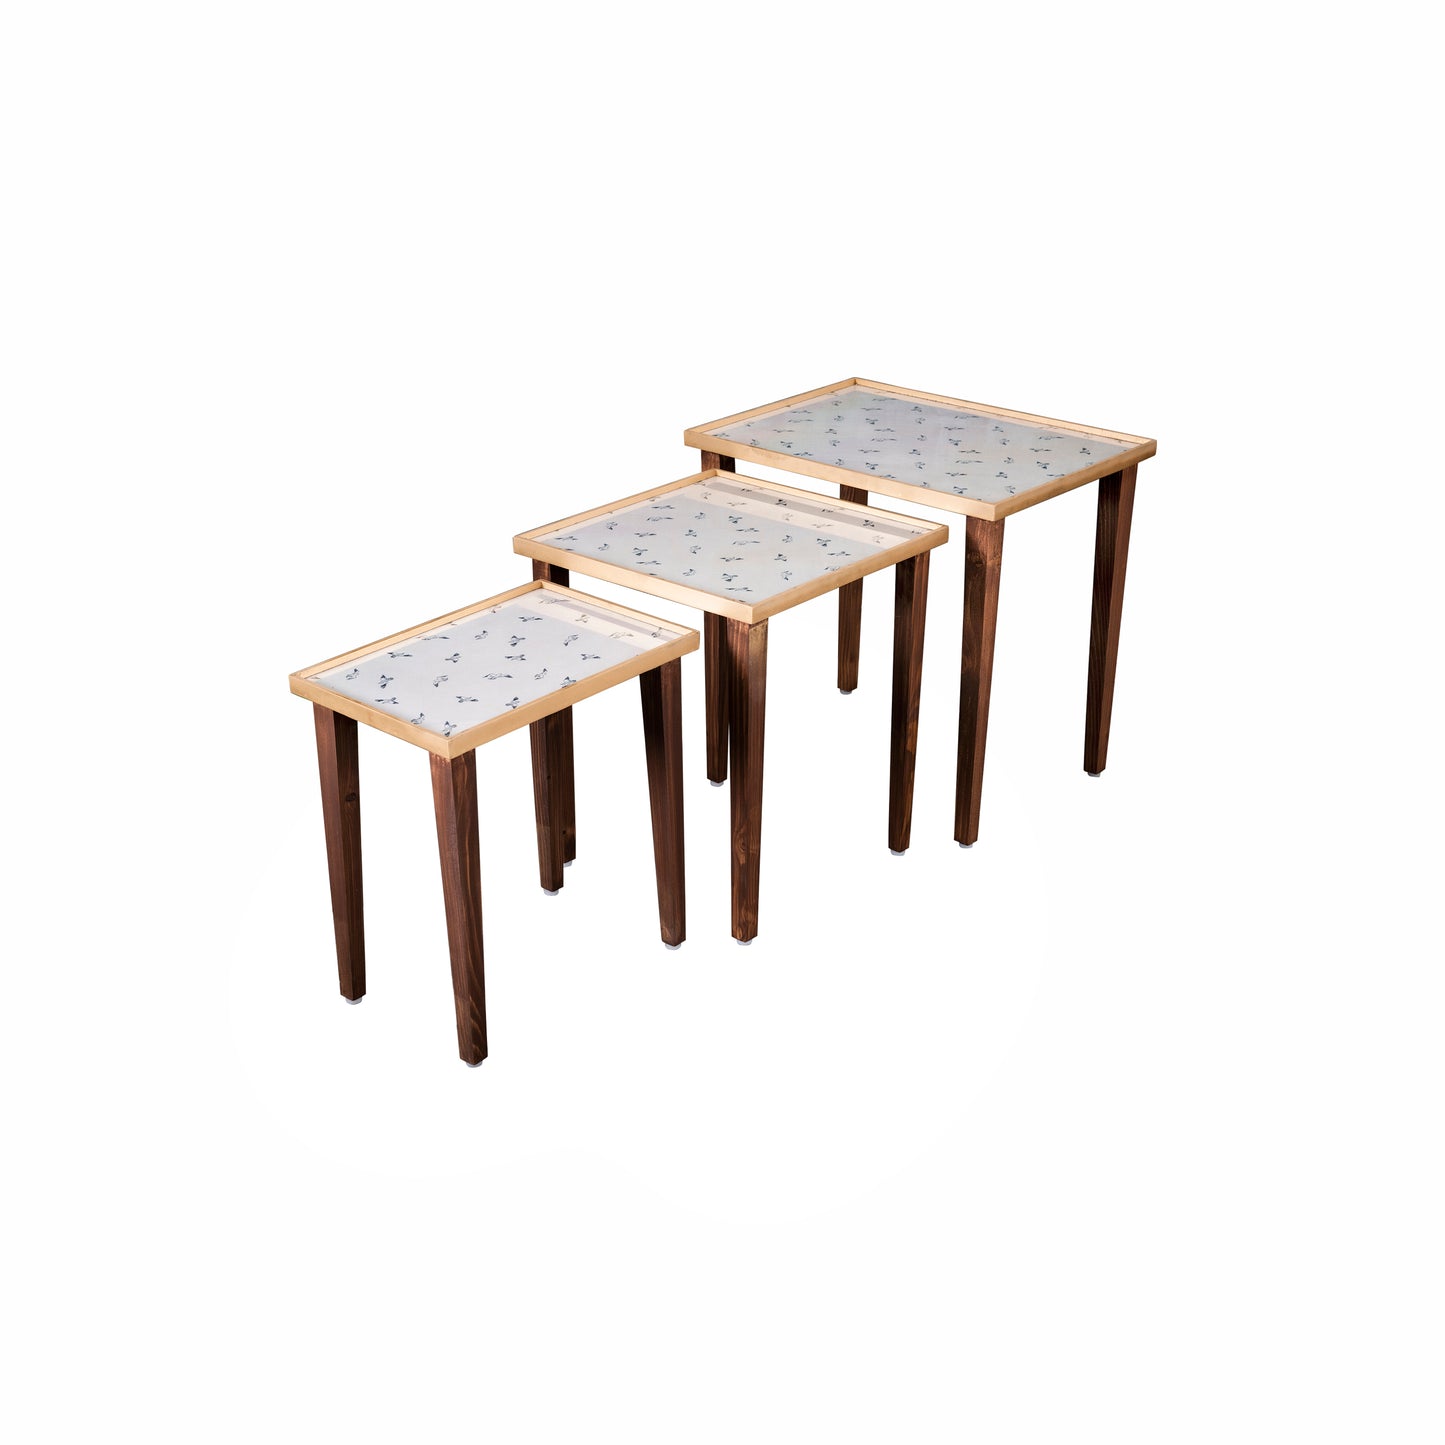 A Tiny Mistake Seagull Wooden Rectangle Nesting Tables (Set of 3), Living Room Decor